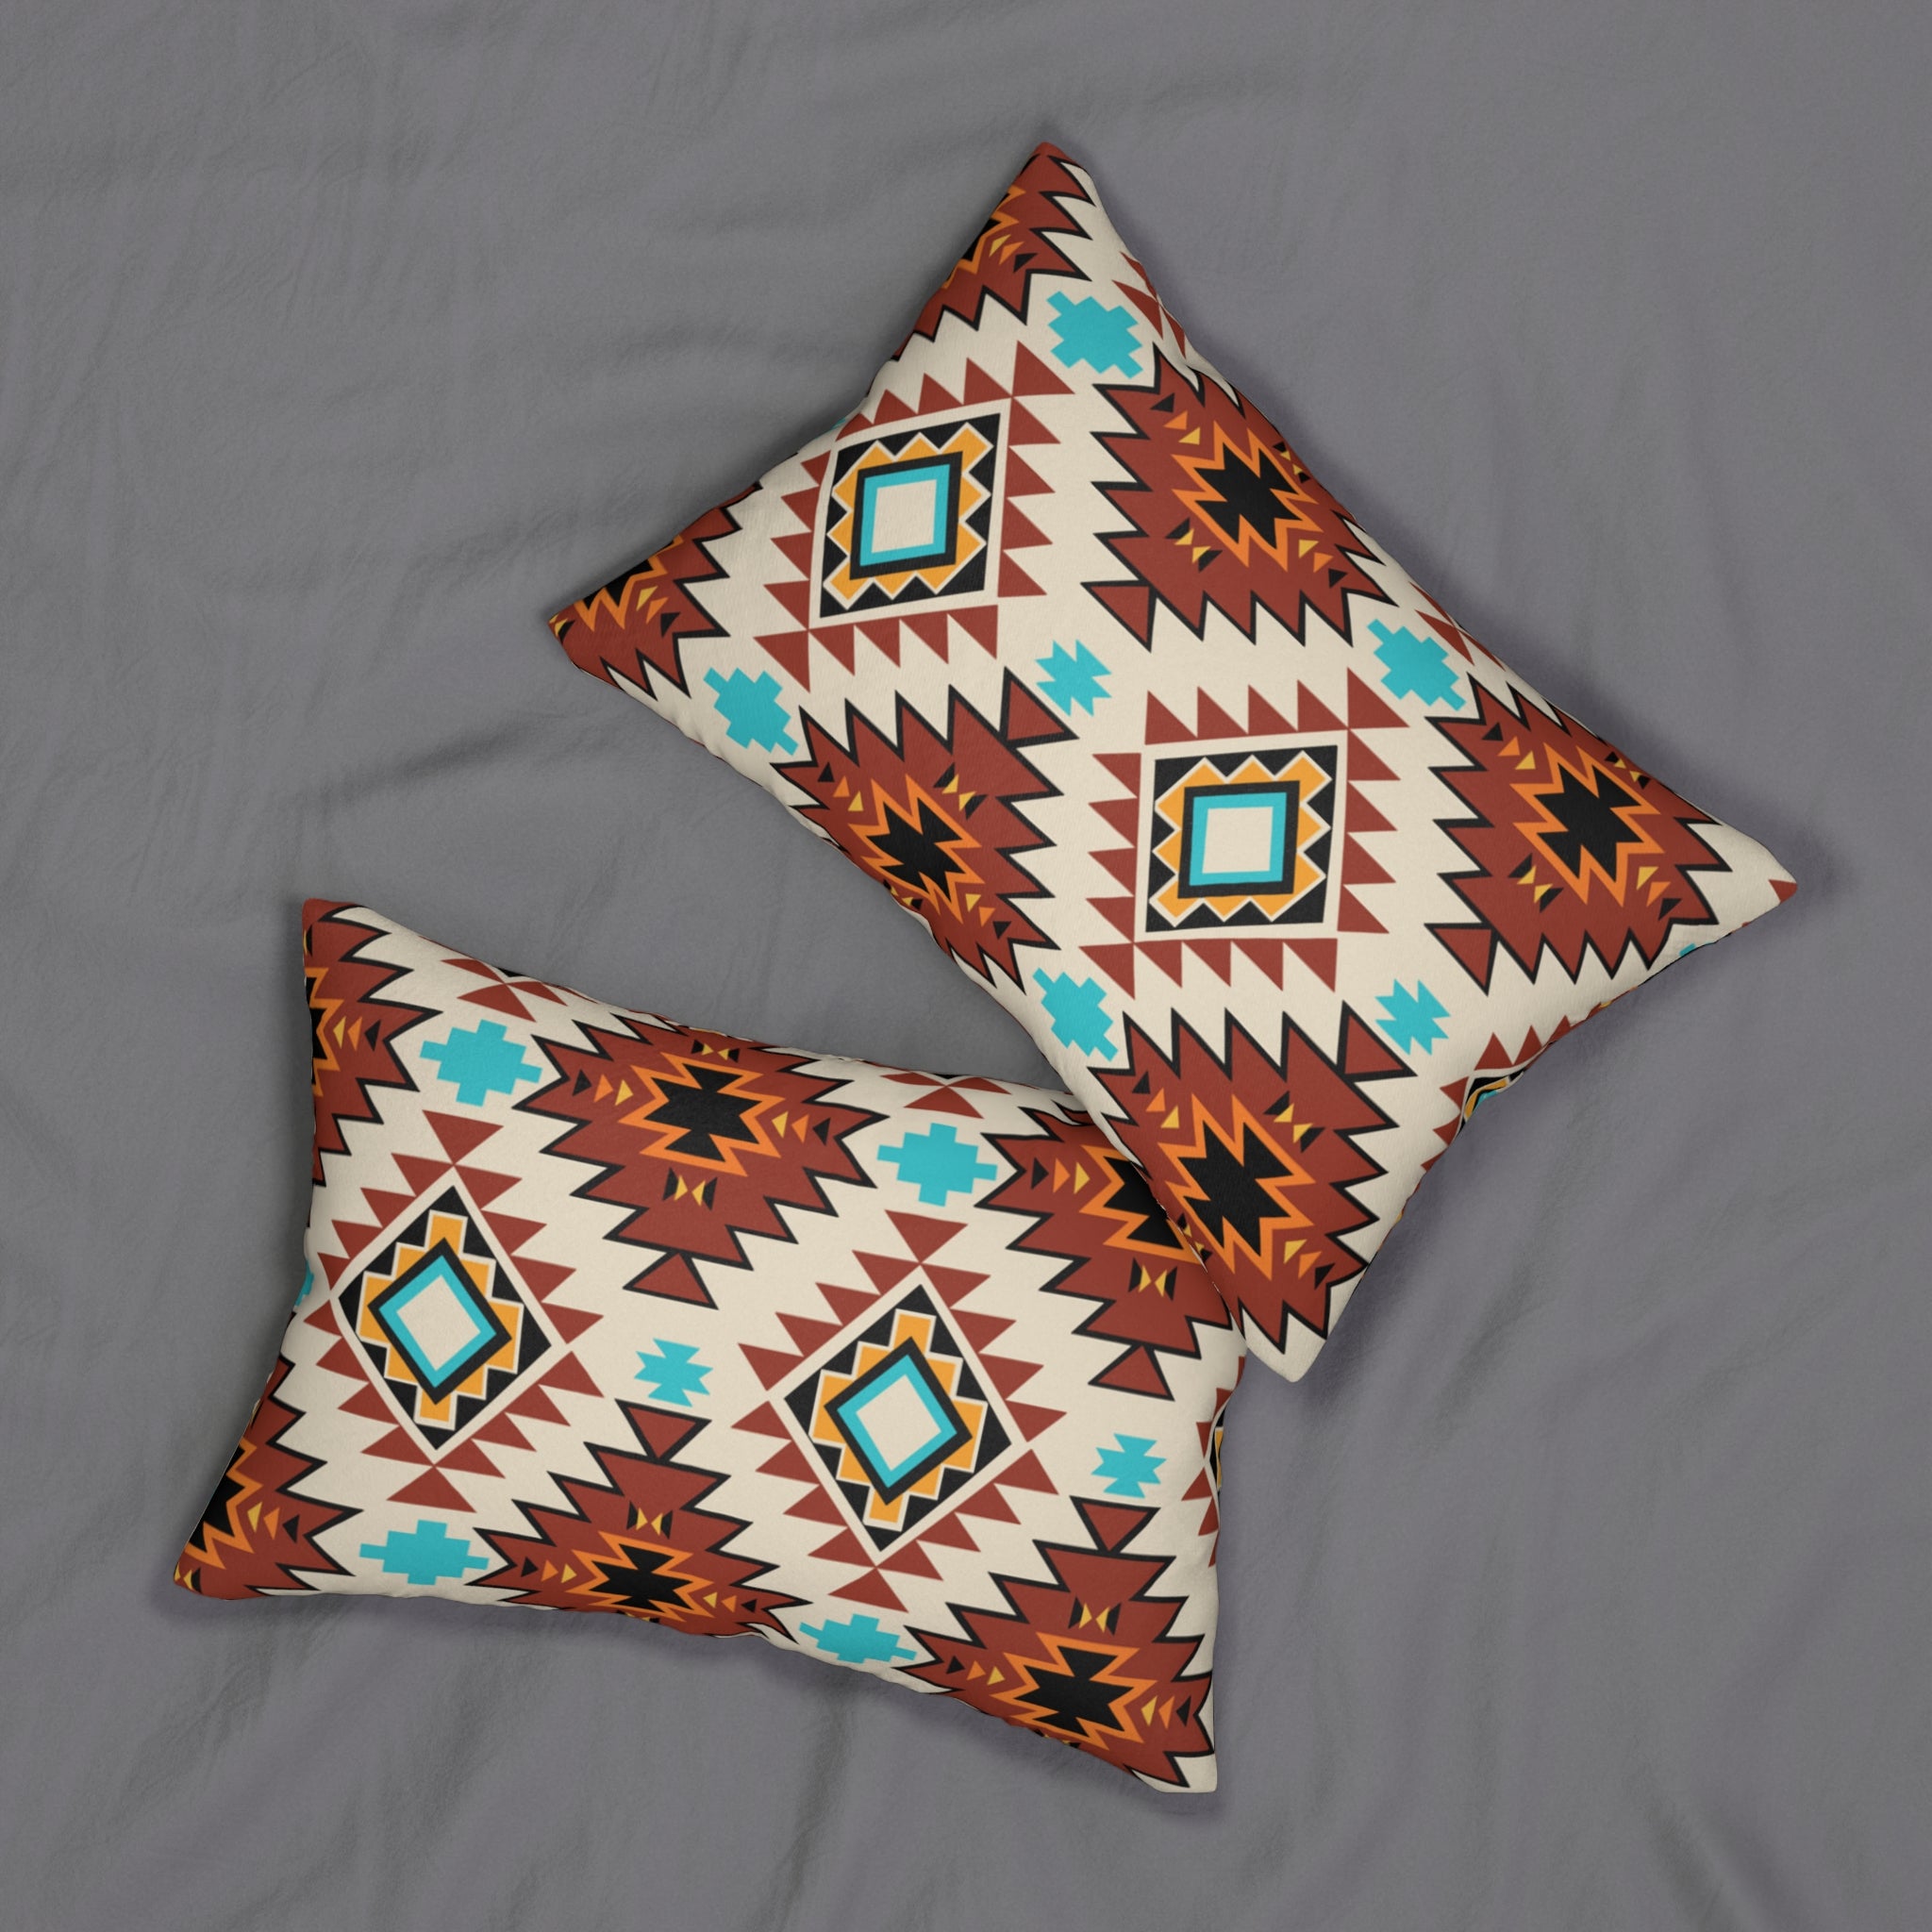 Cultural Two Themed Polyester Pillow